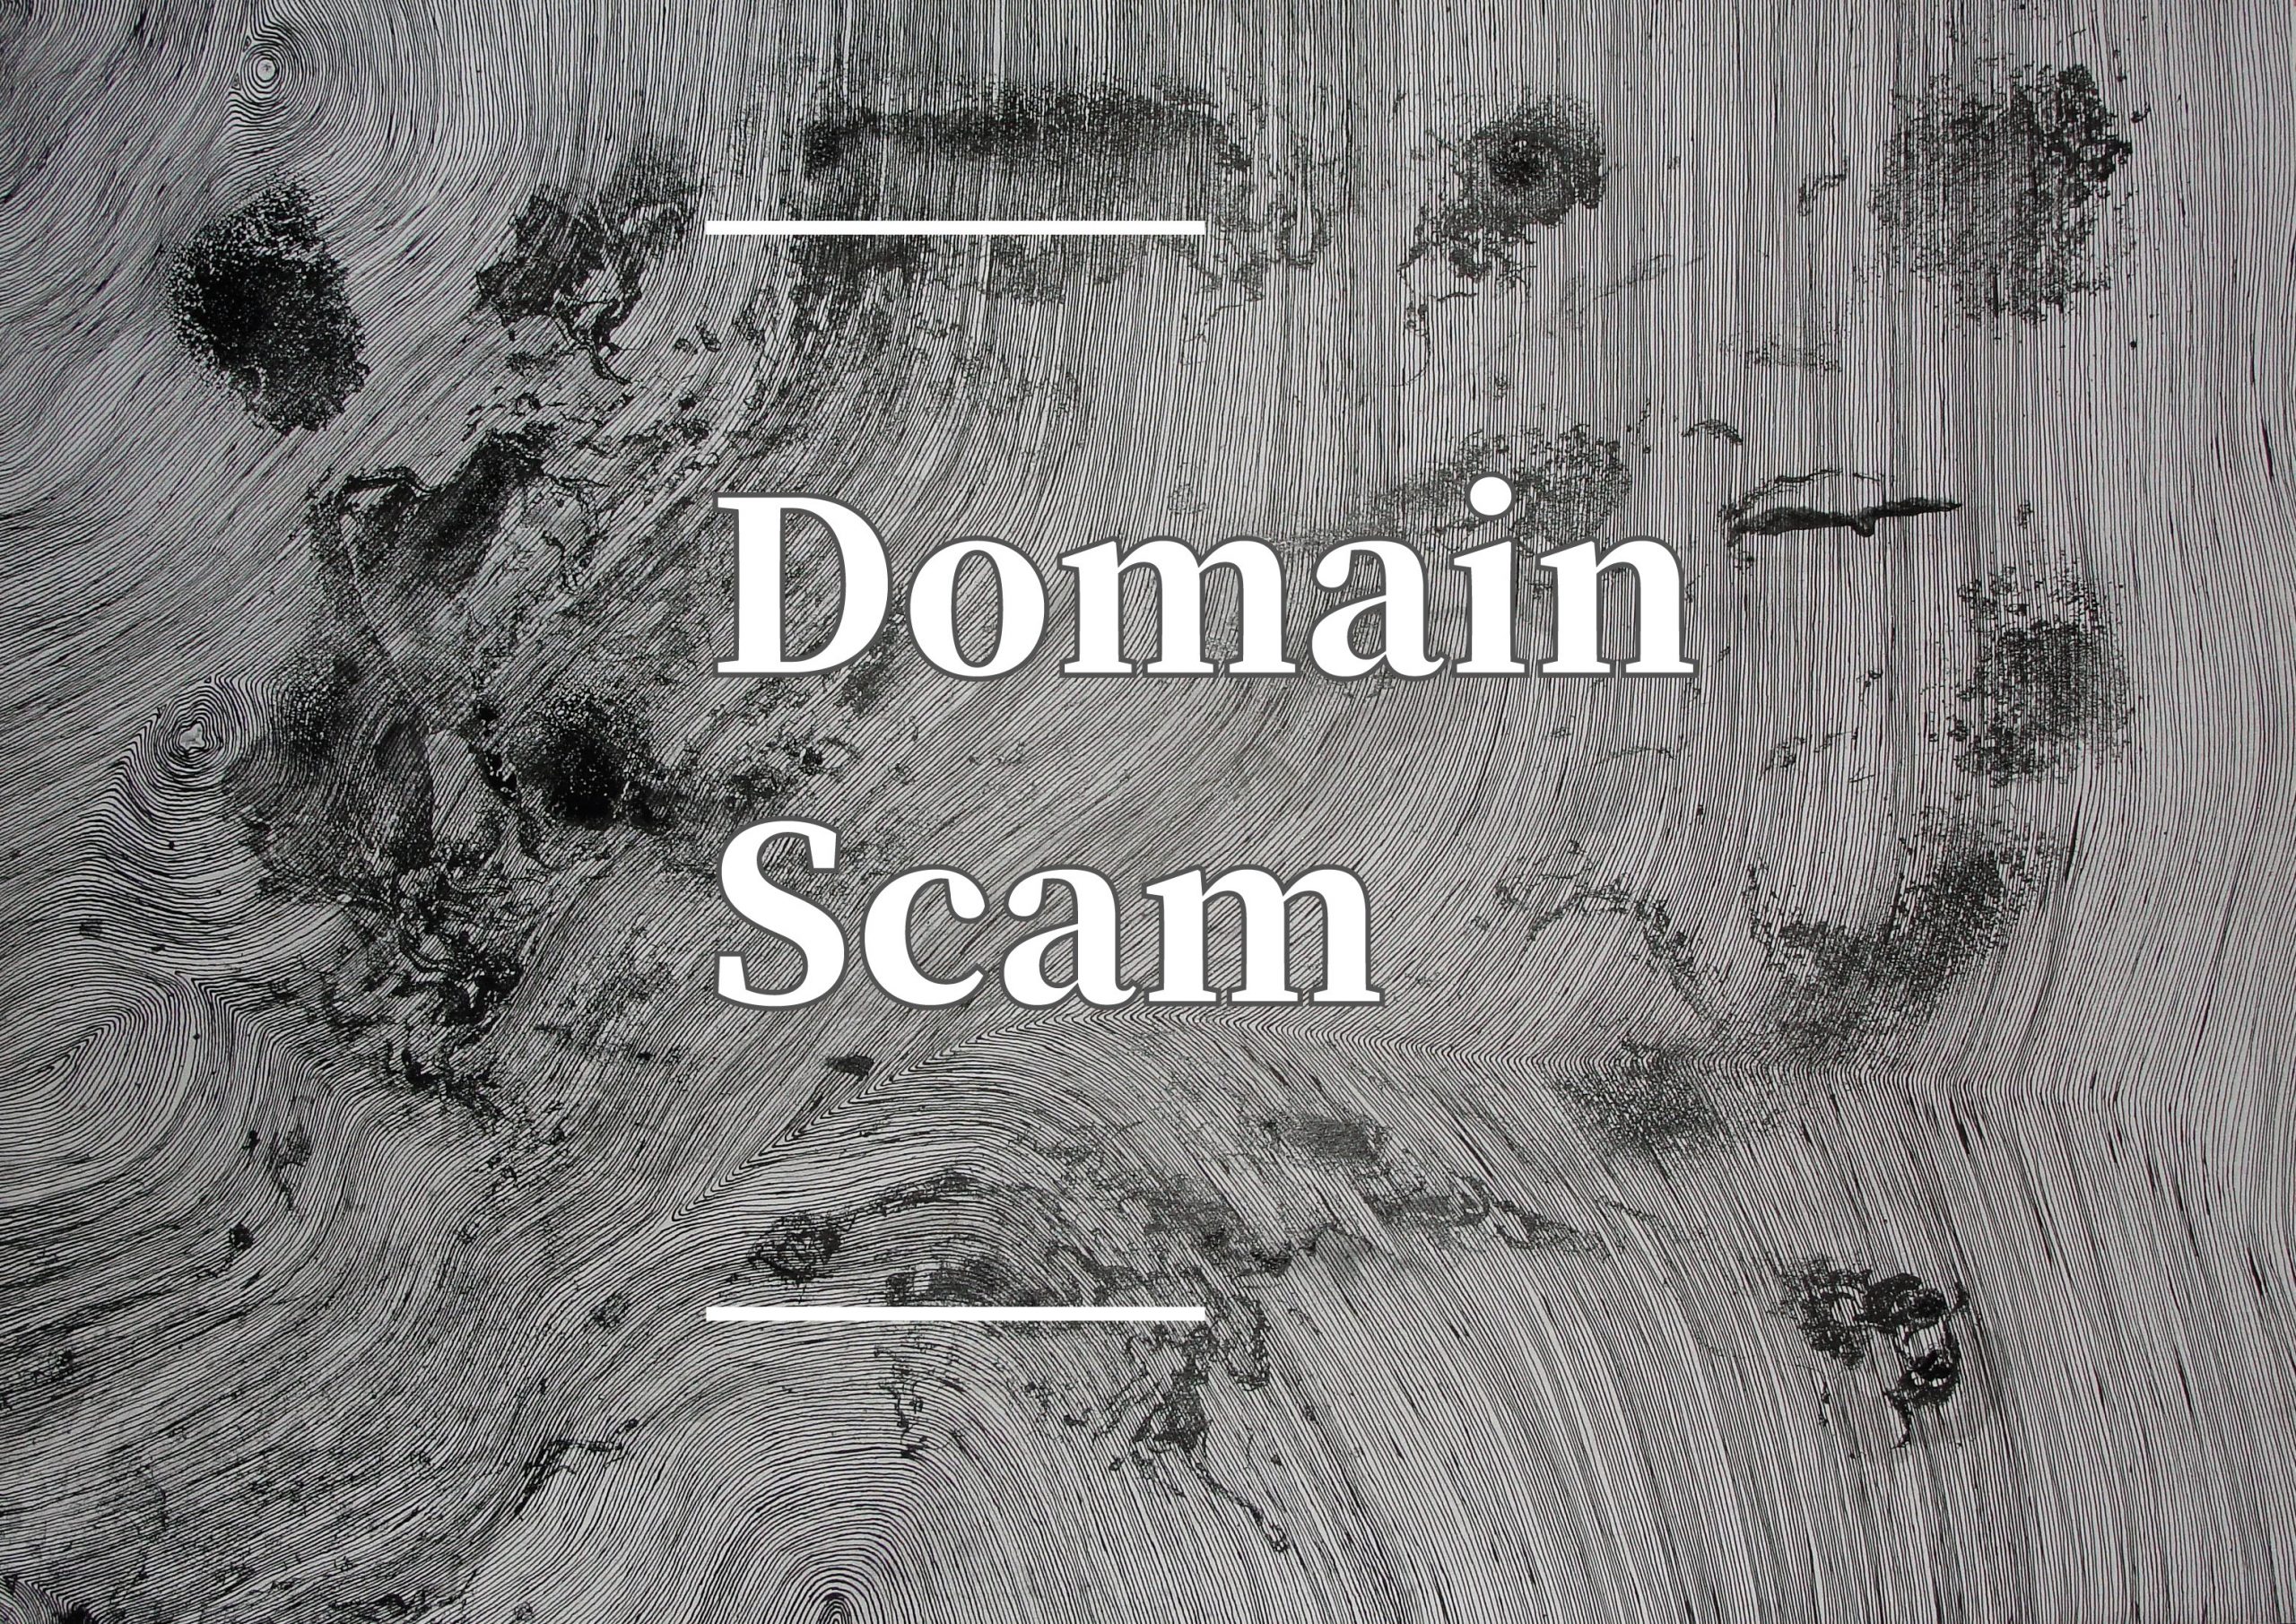 Read more about the article Domain Scam Awareness